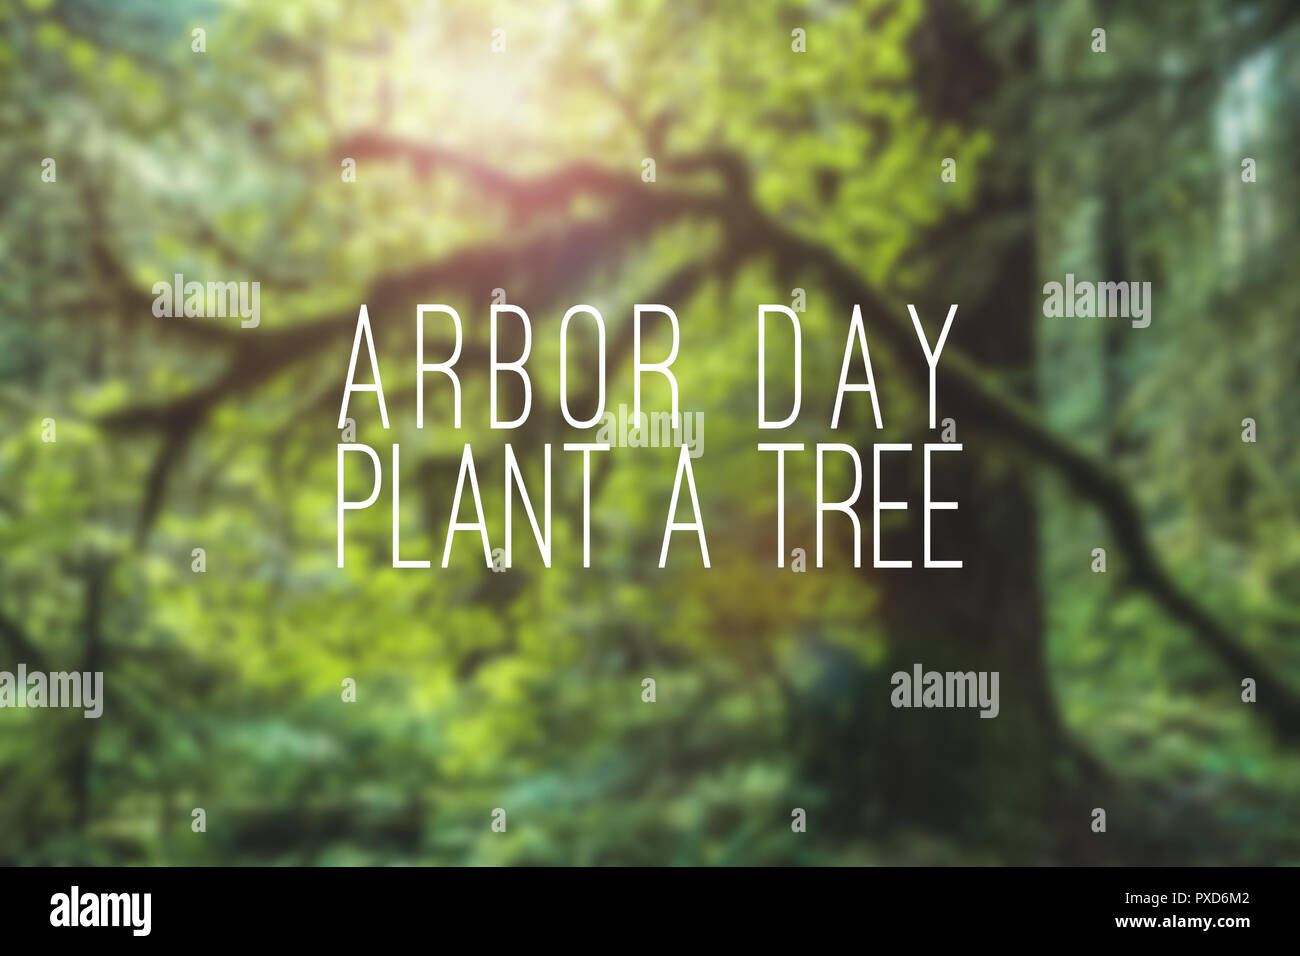 Arbor Day plant a tree mockup with forest or trees or green natural blurry backdrop or background. Holiday event concept. Stock Photo